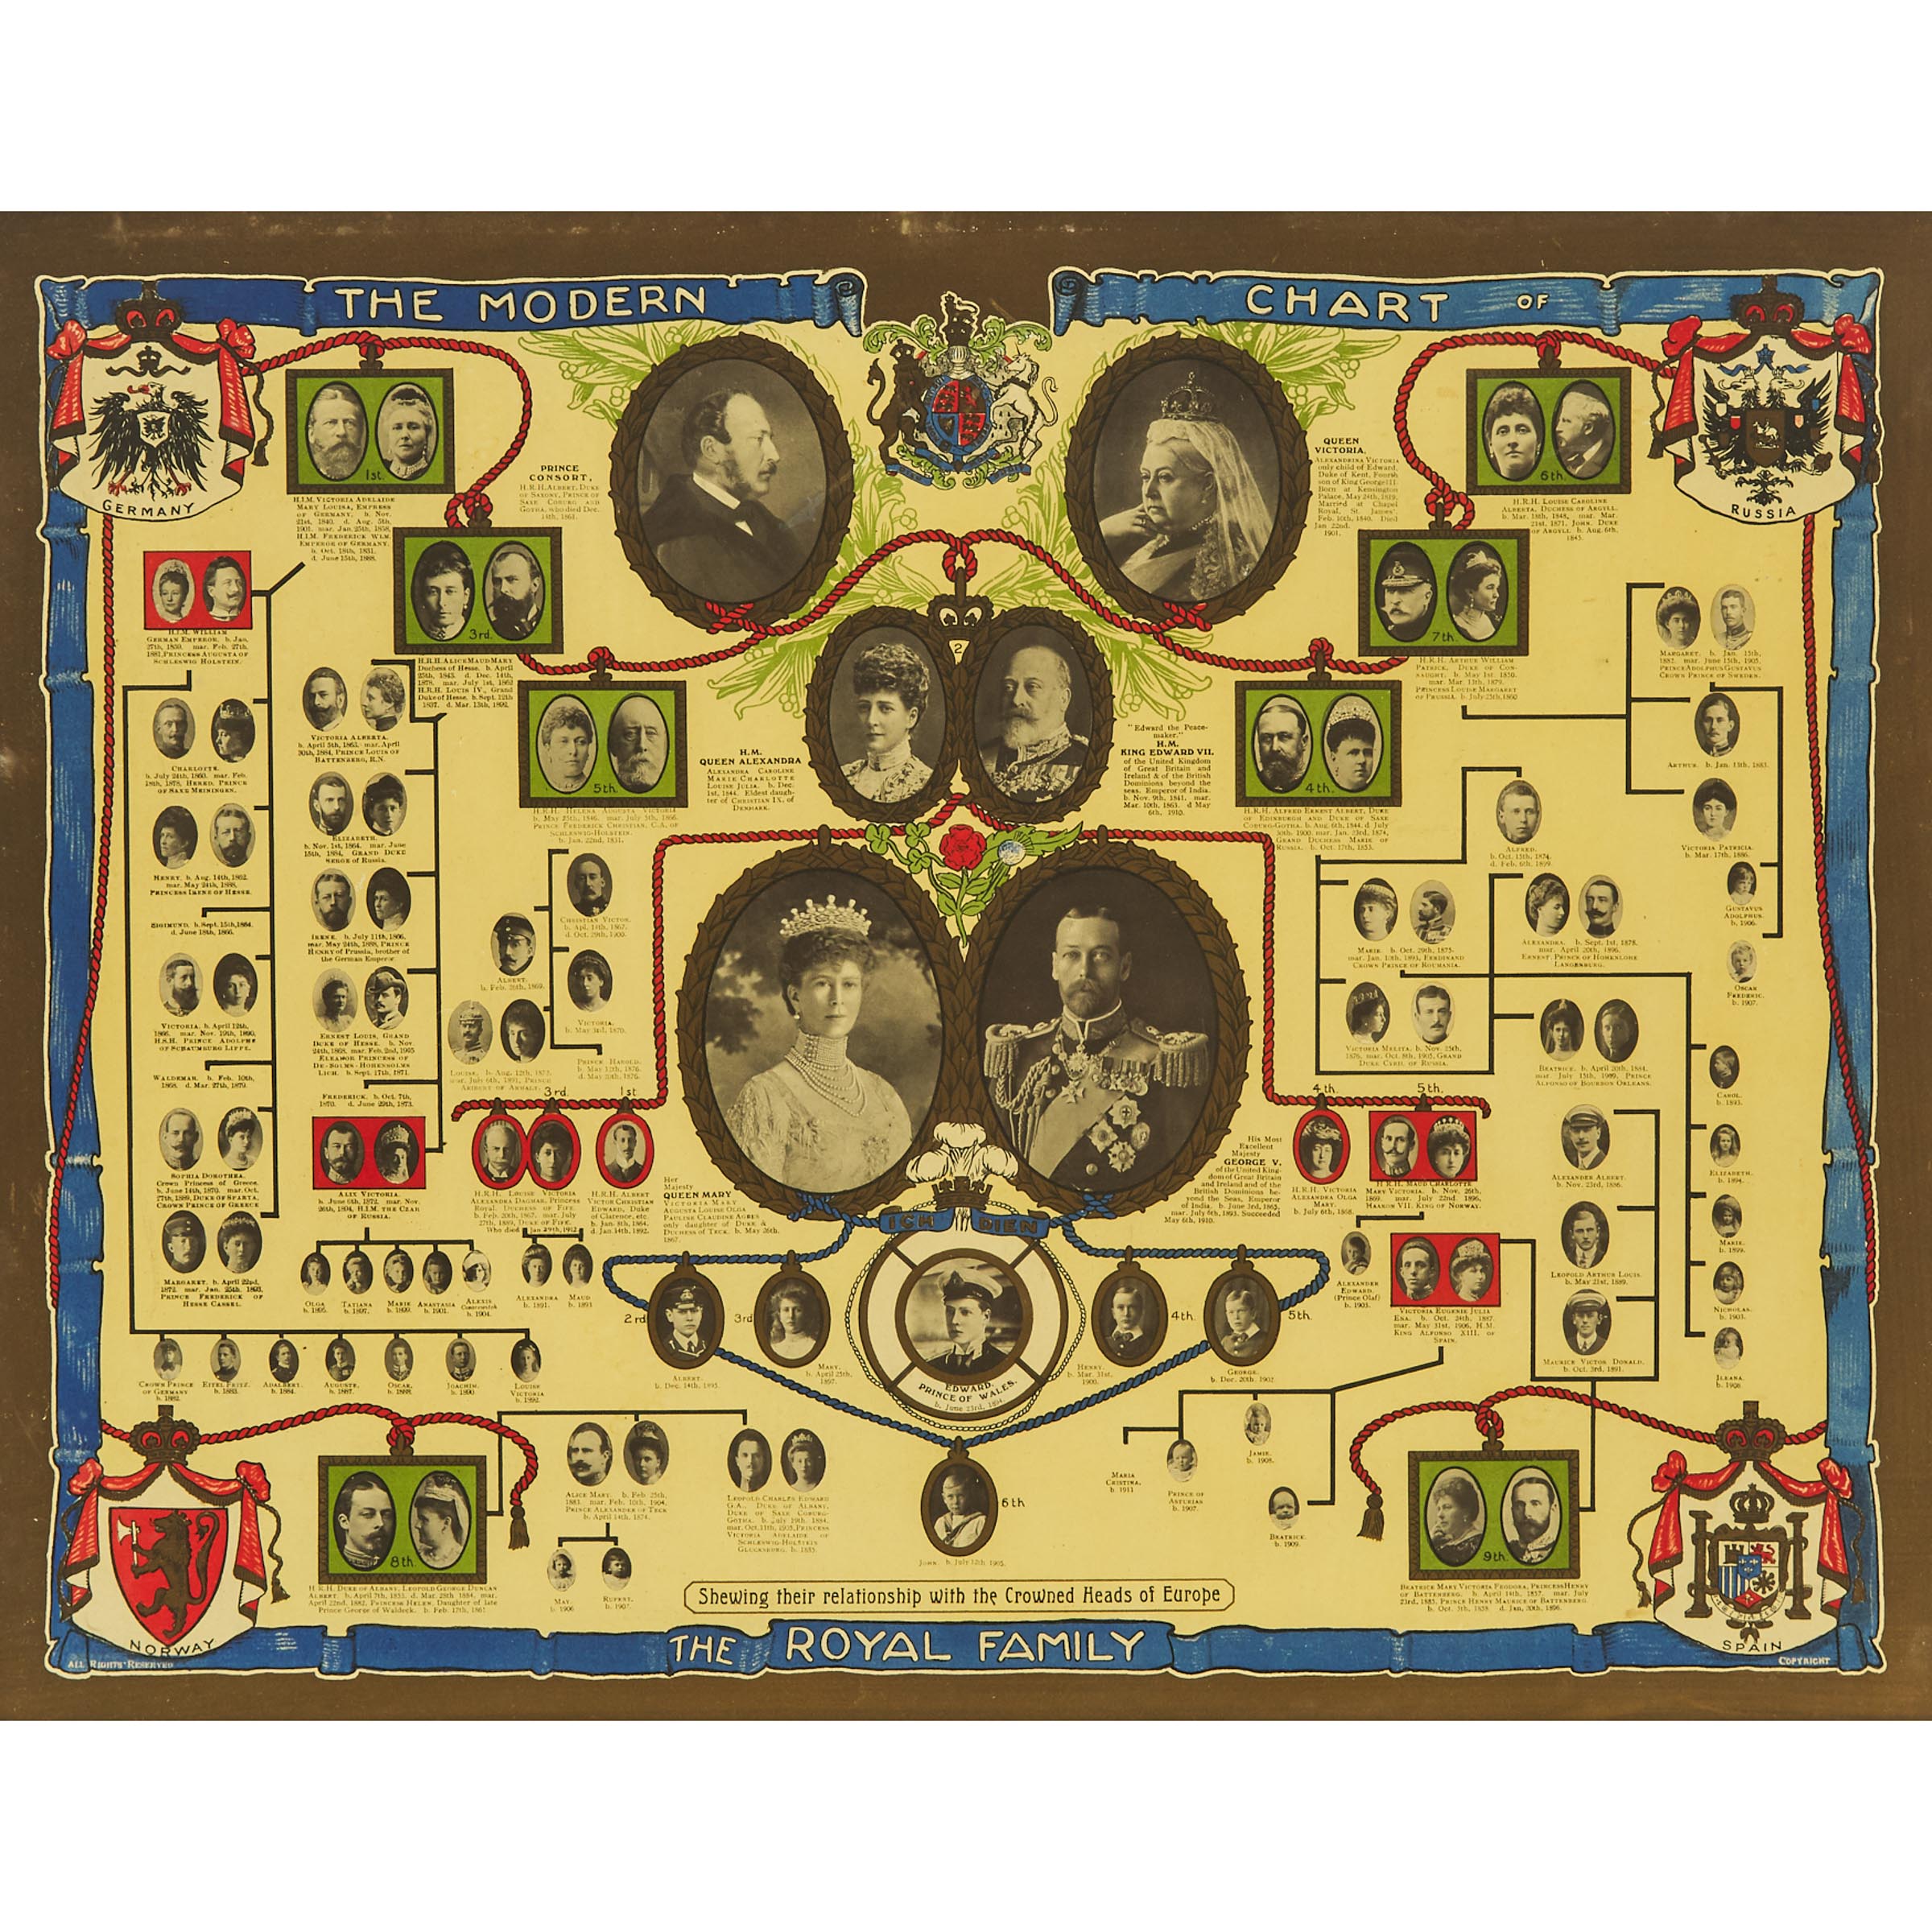 The Modern Chart of the Royal Family Shewing their Relationship with the Crowned Heads of Europe, c.1912